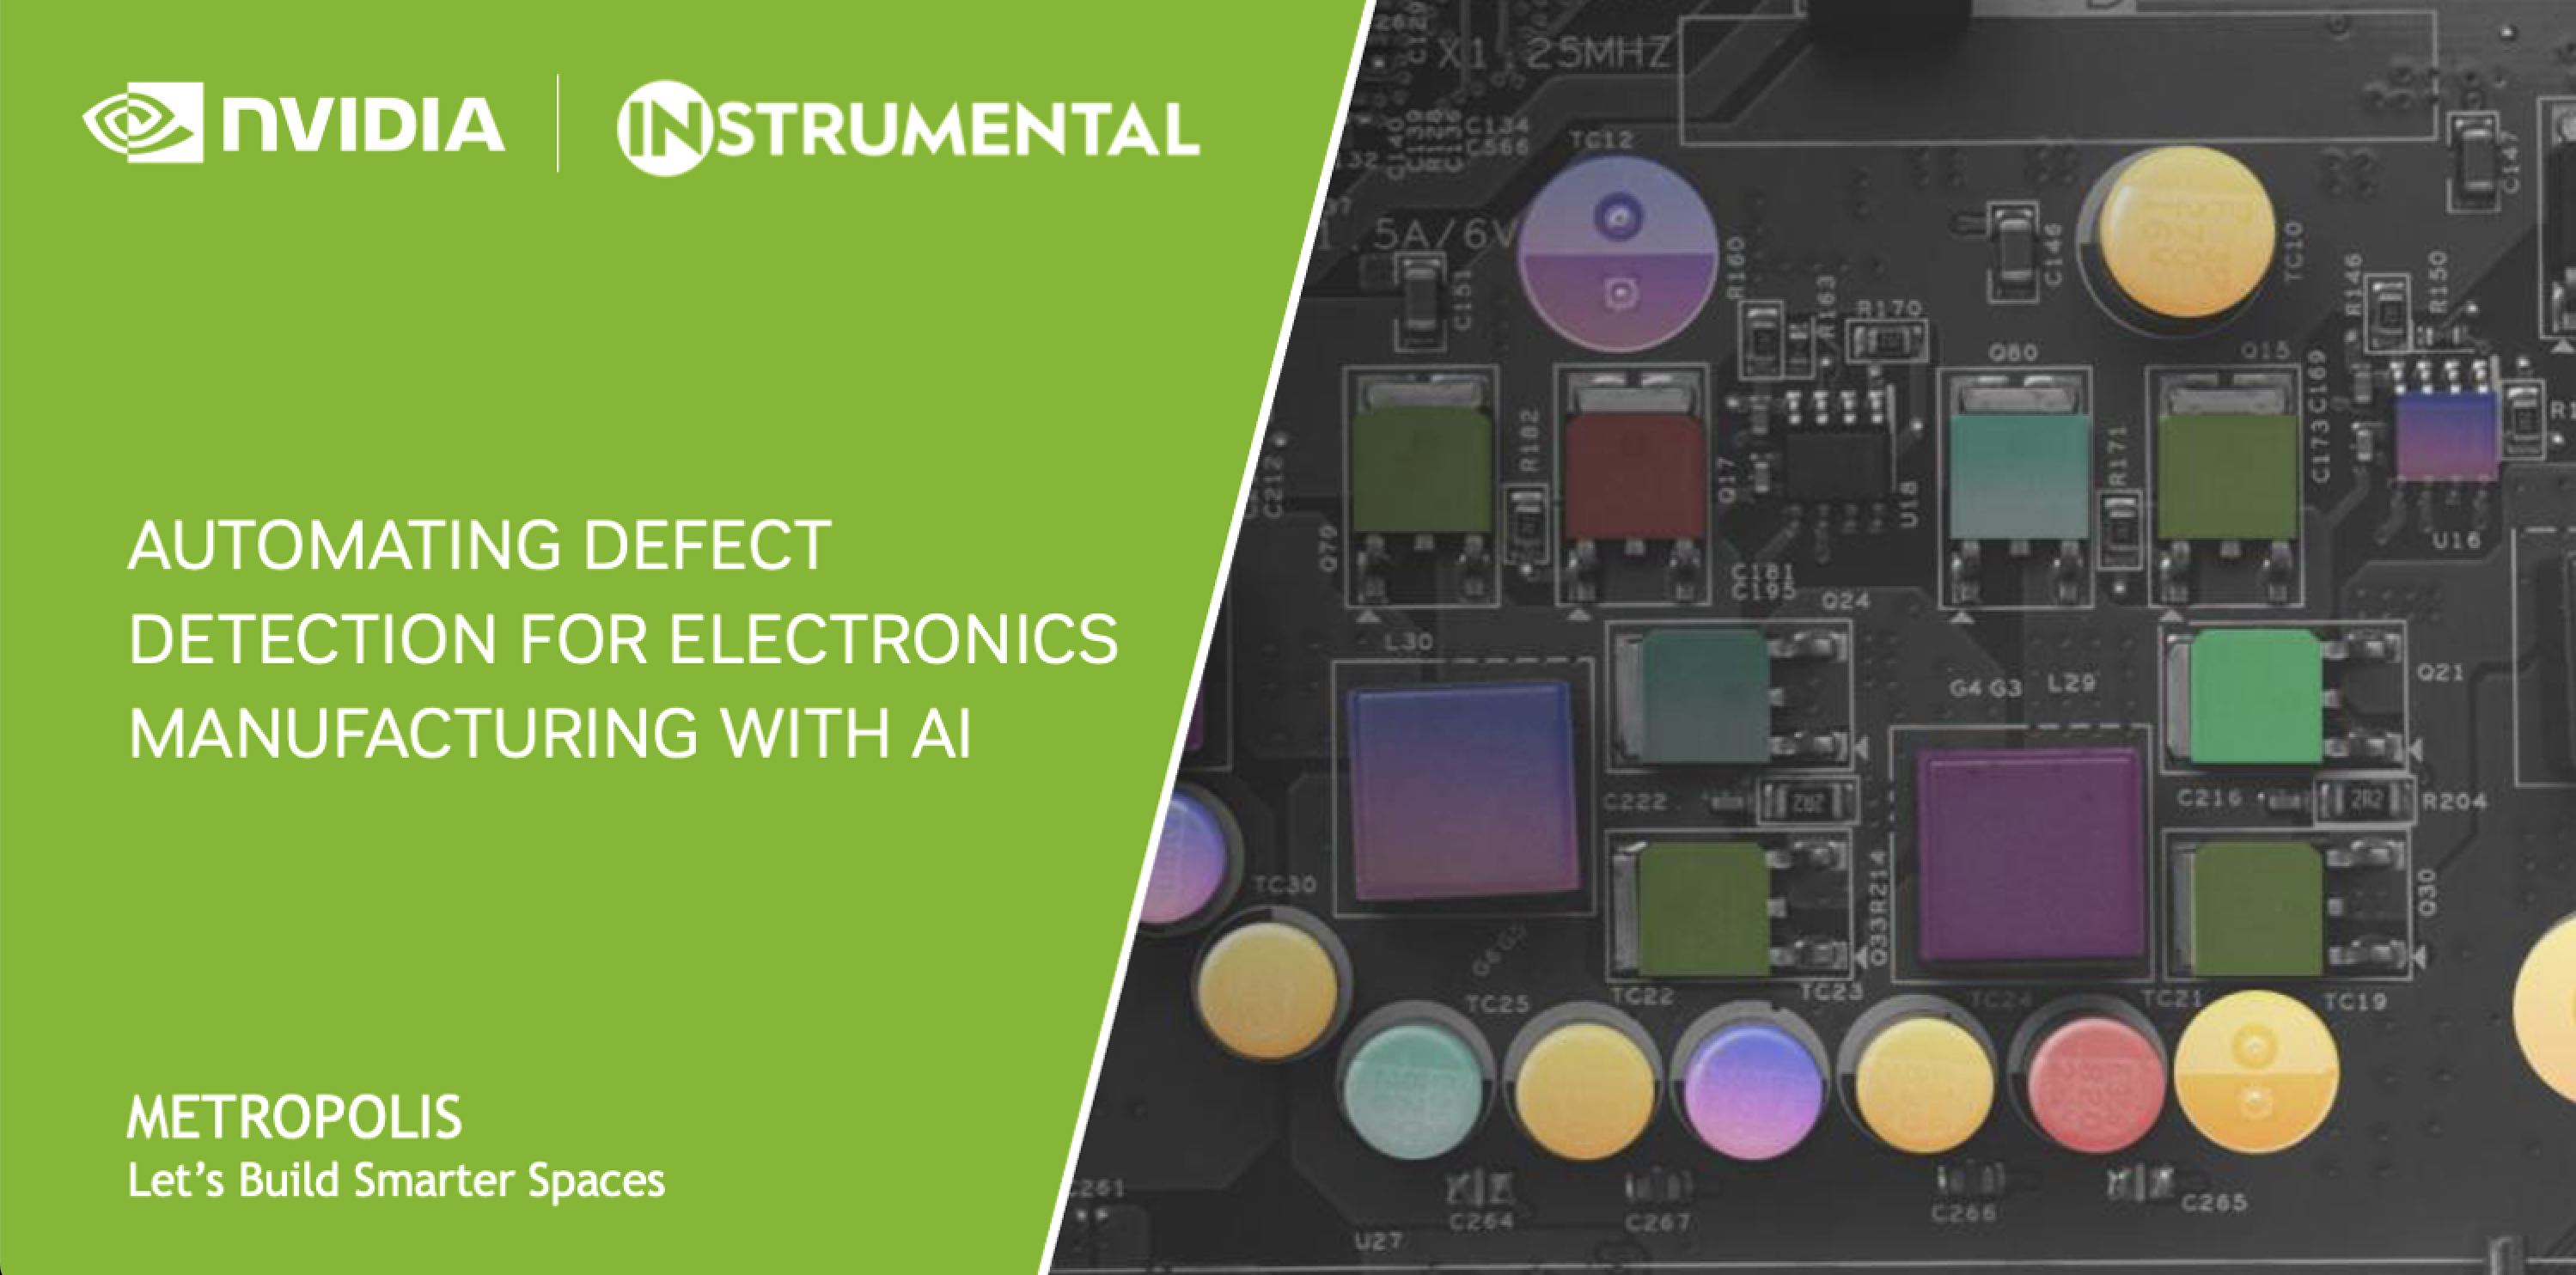 Instrumental joins NVIDIA Metropolis to enable fully automated defect detection for complex electronics assembly Image